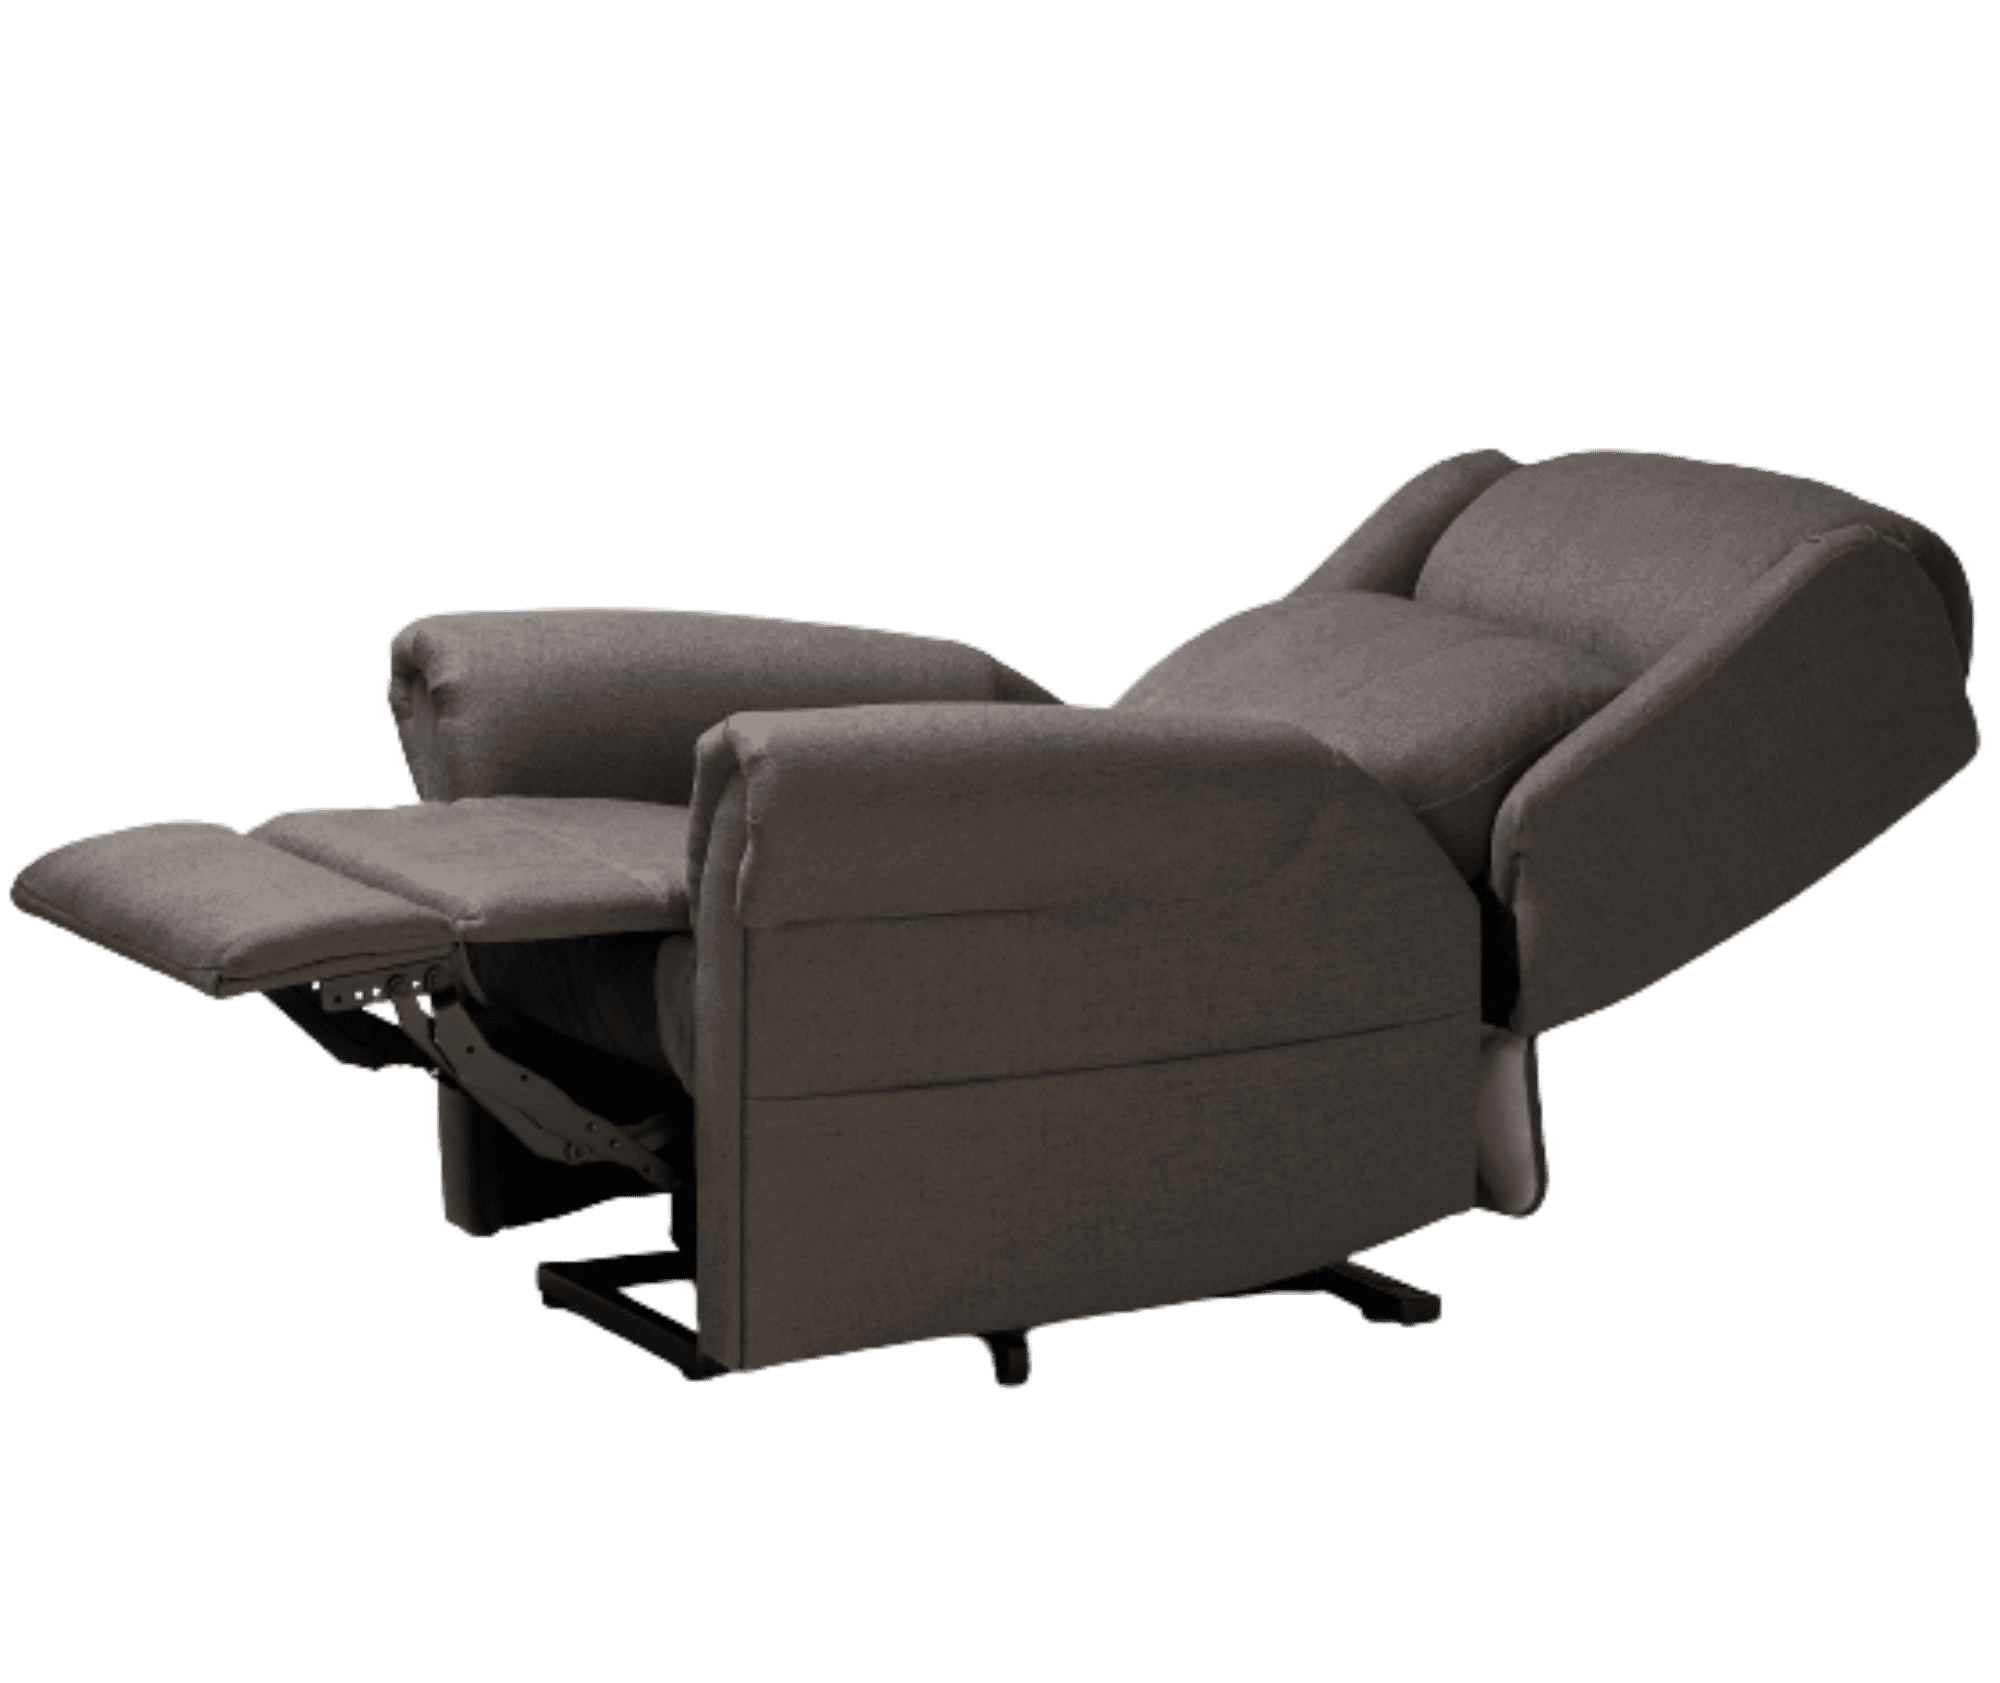 a reclining chair with a foot rest.